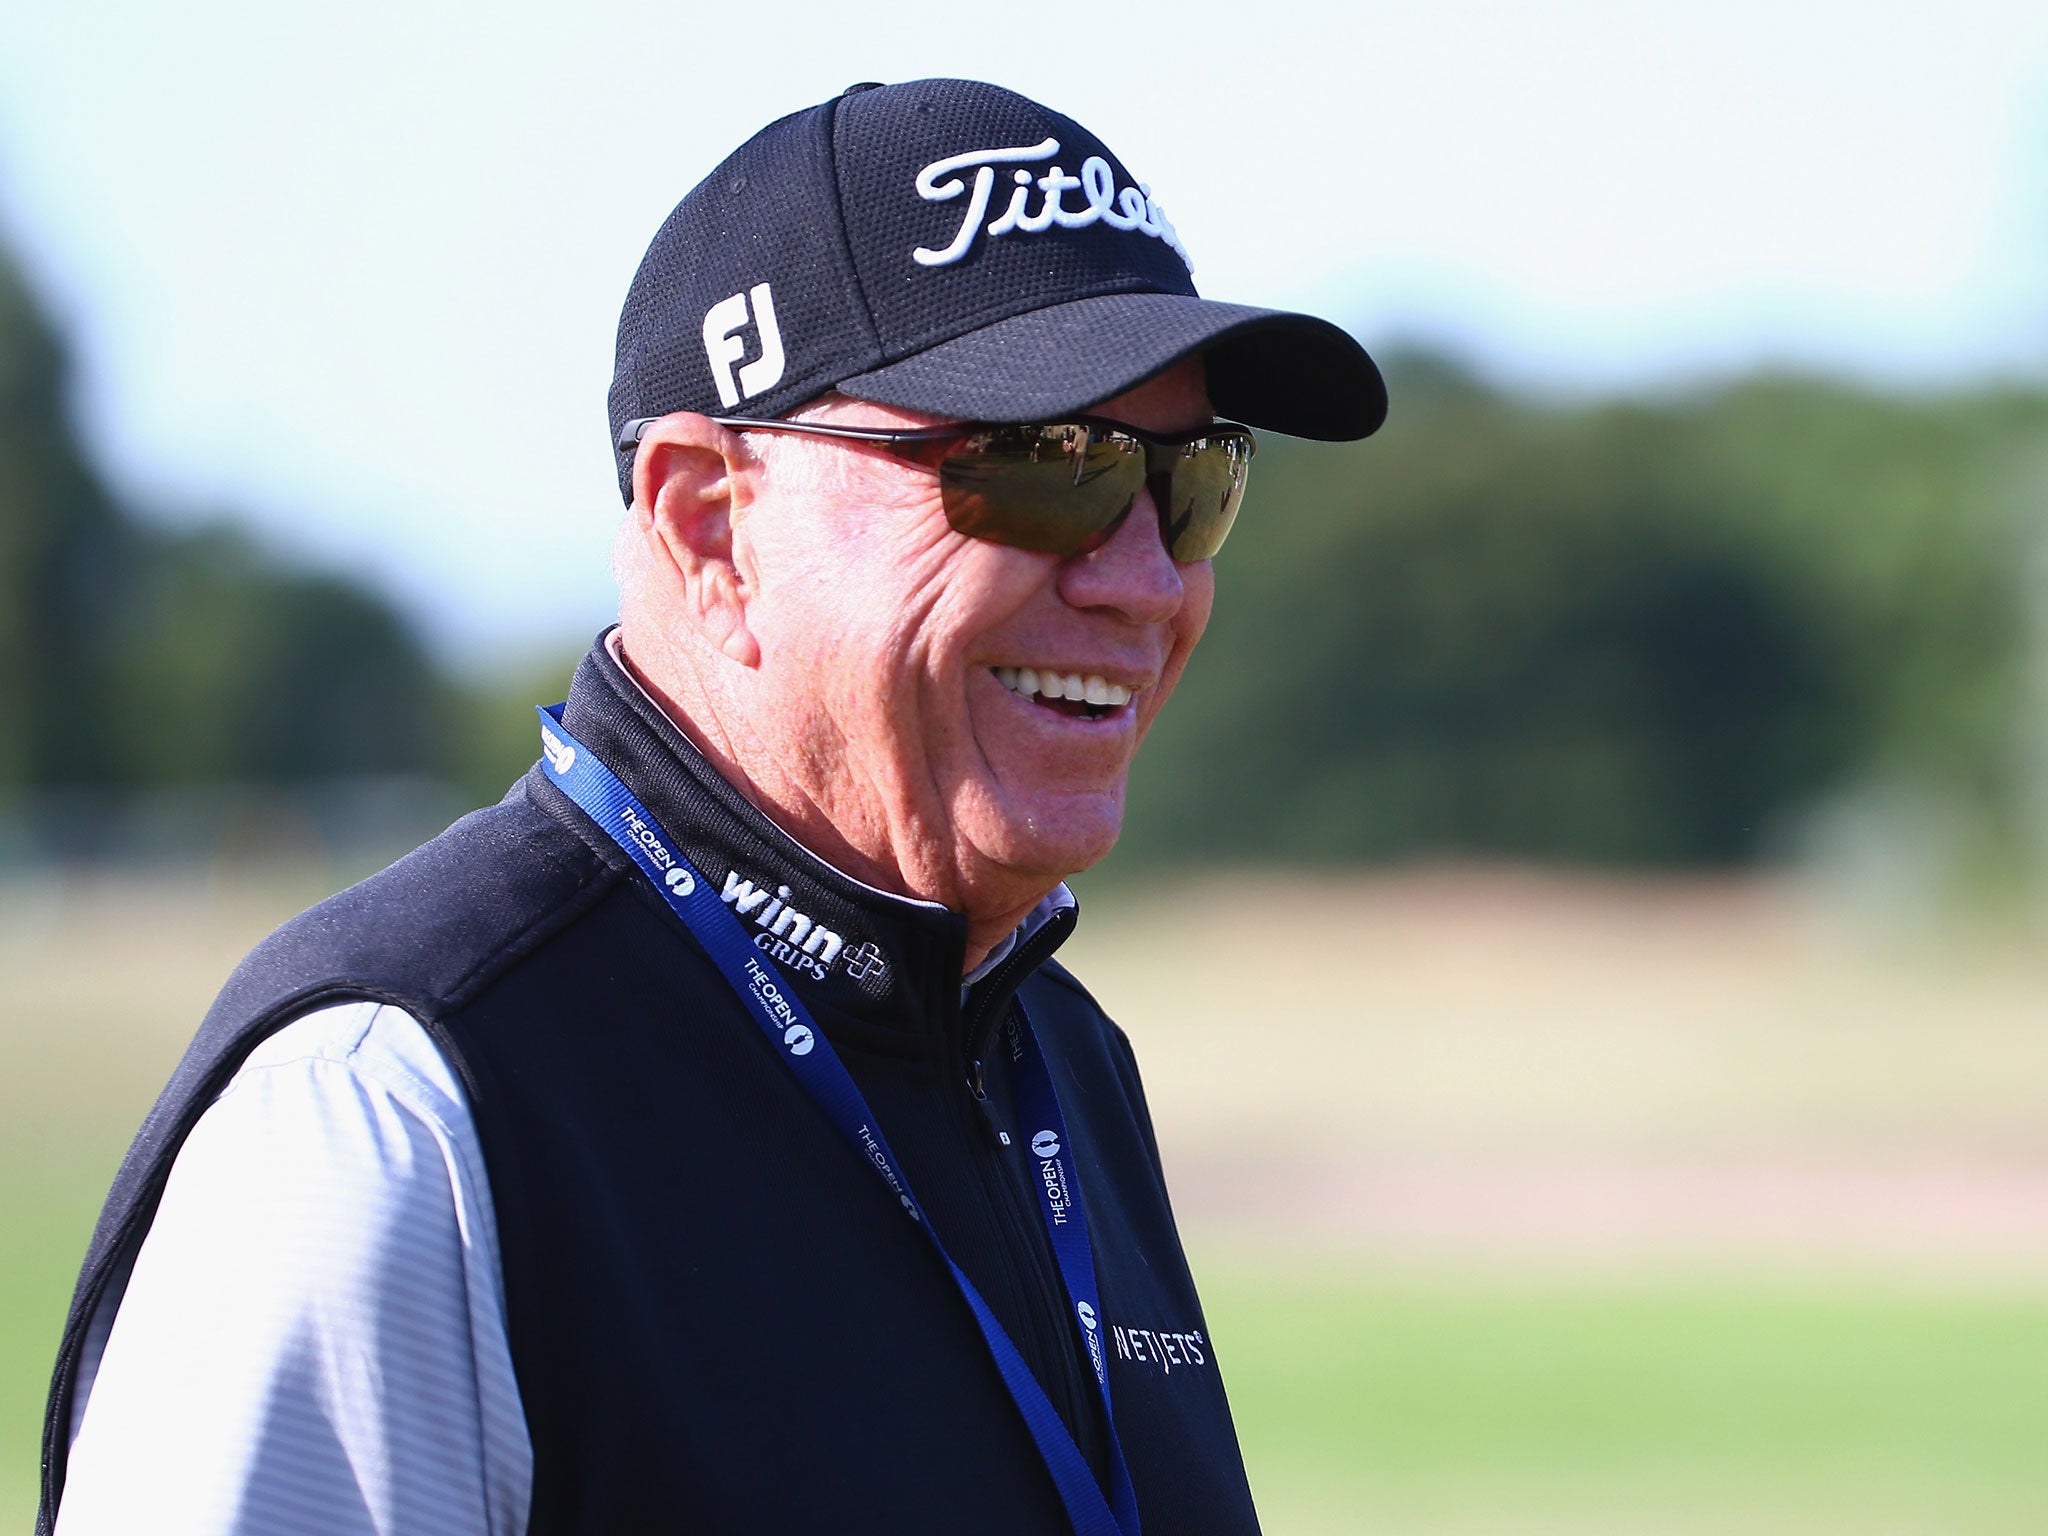 Butch Harmon, the former coach of Tiger Woods, has described Rory McIlroy as a “phenomenon”